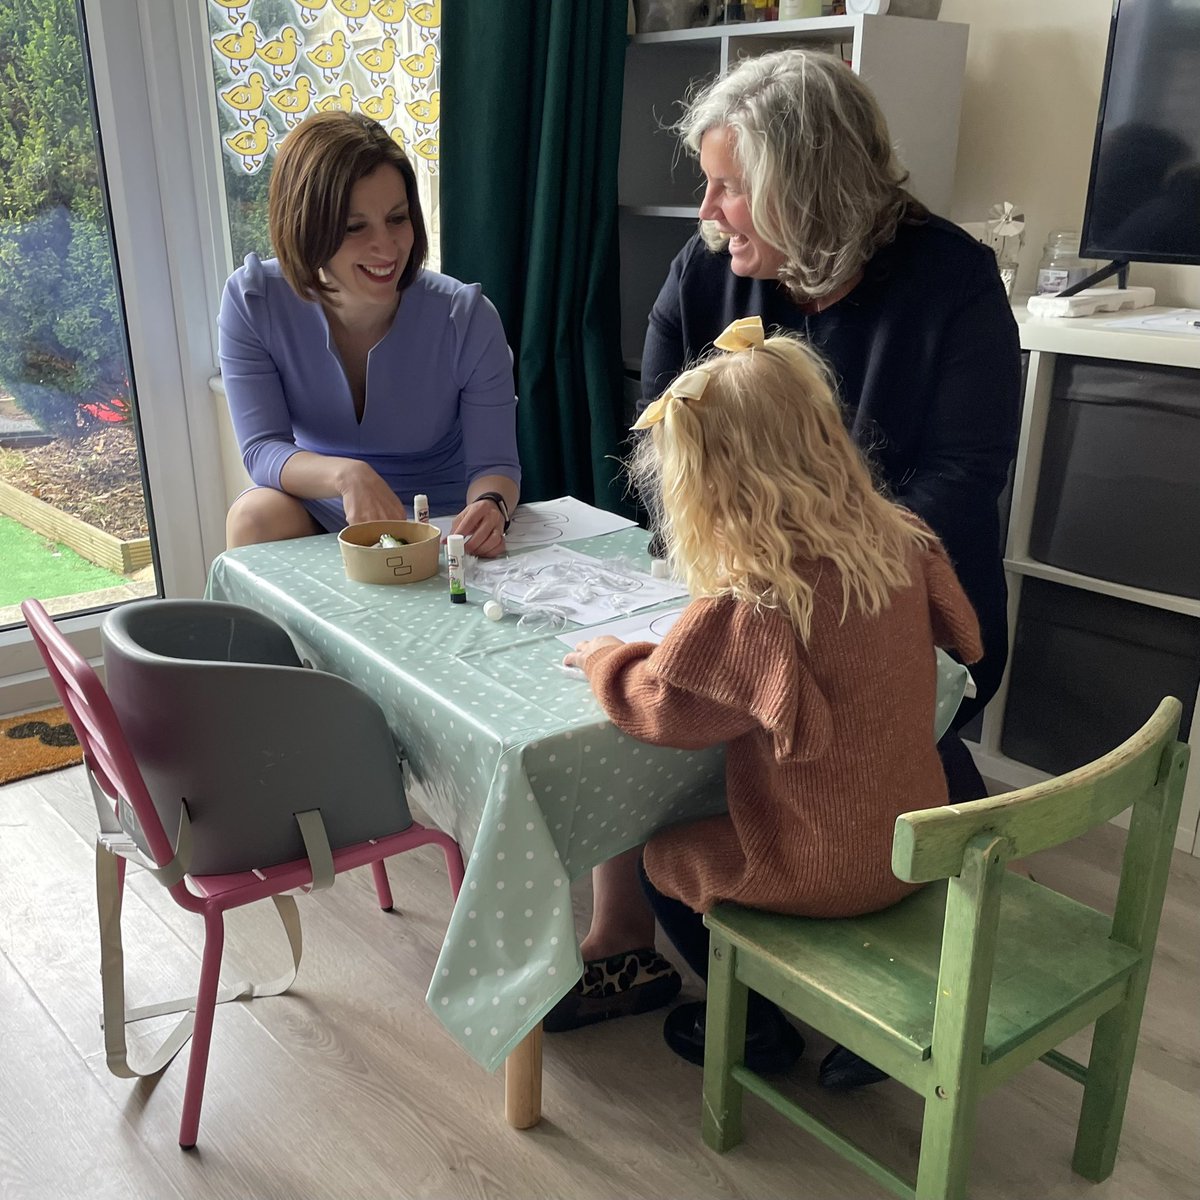 In Swindon, there are more than two children for every childcare place. Offering parents more childcare hours is no good if they can’t access them - the Tories have set families up to fail. Labour will build a modernised childcare system and break down barriers to opportunity.